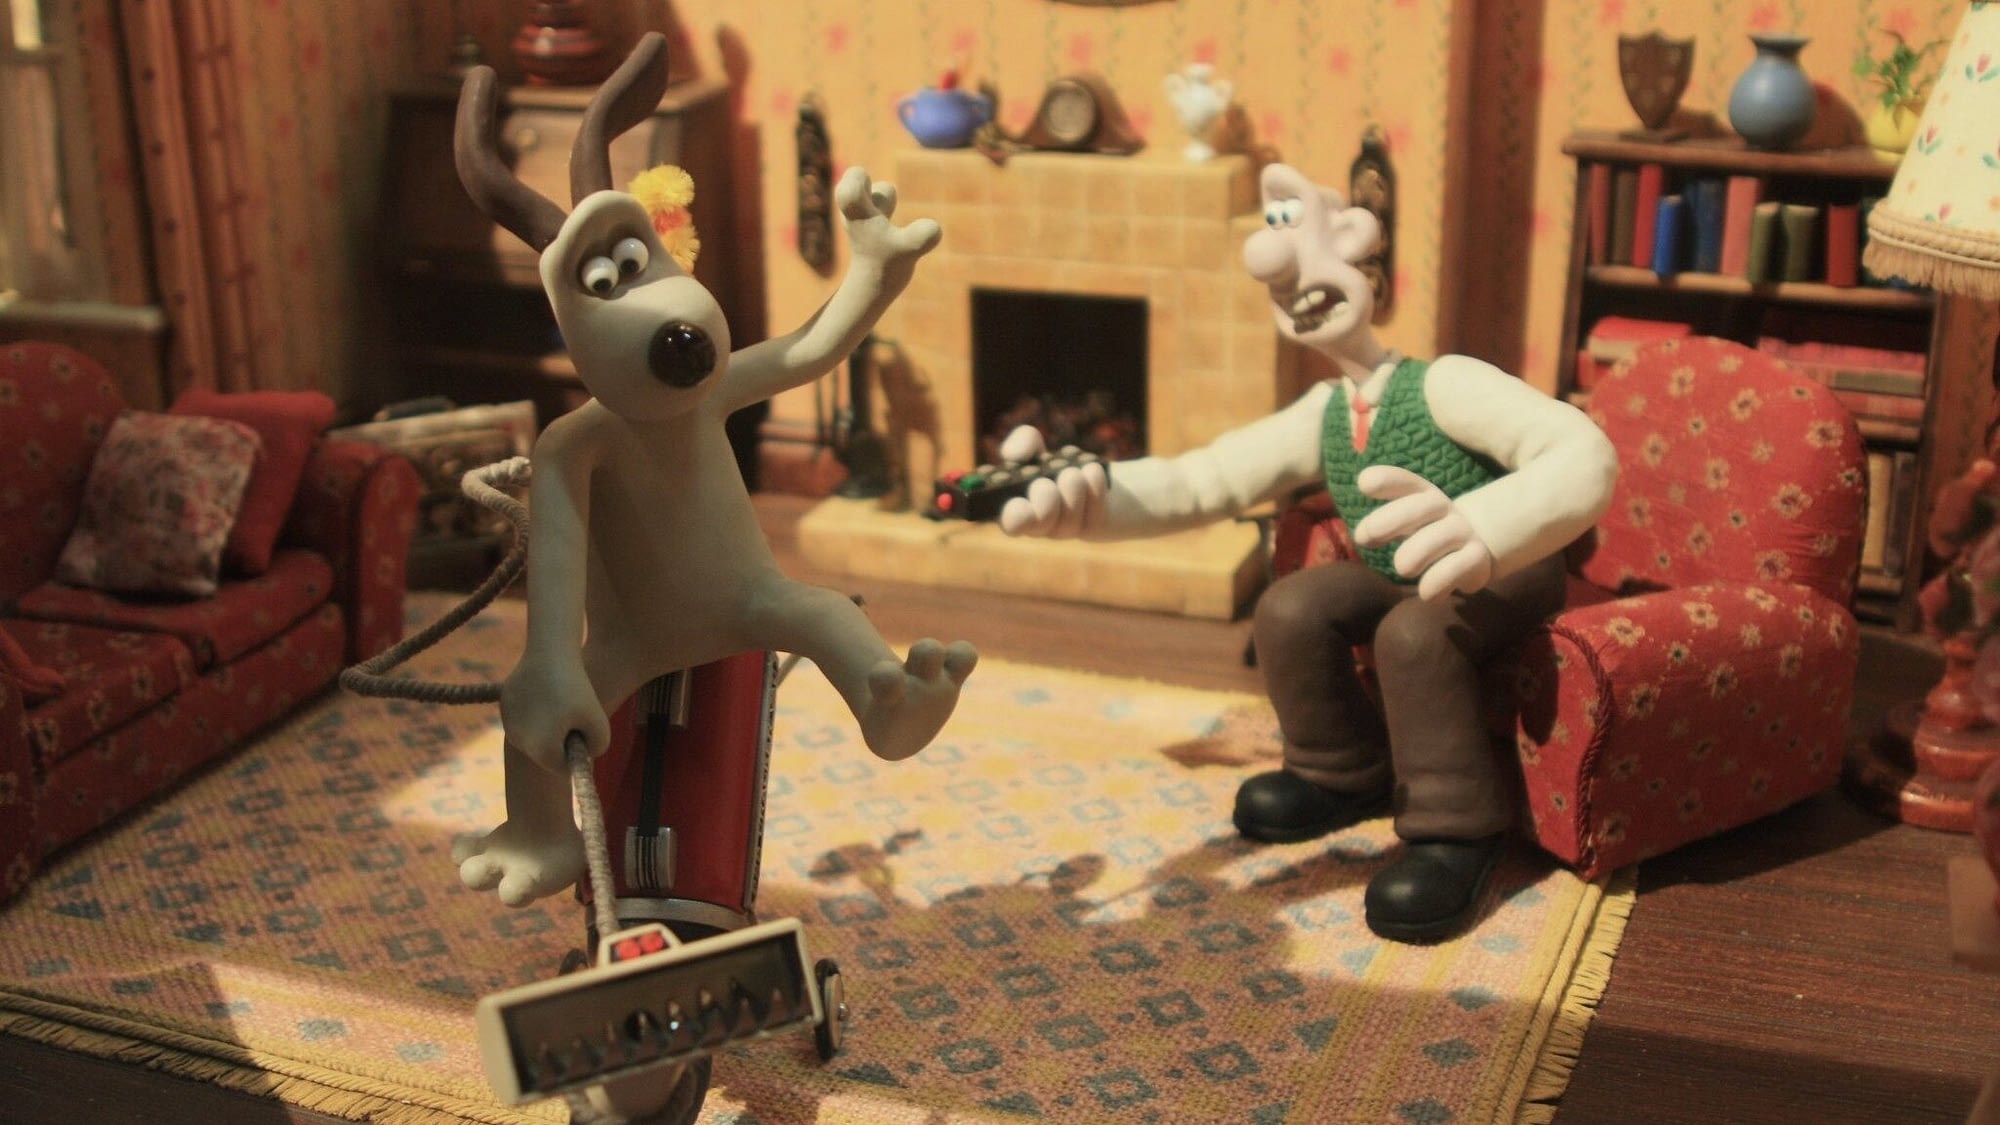 Image: Still shot of Wallace and Gromit